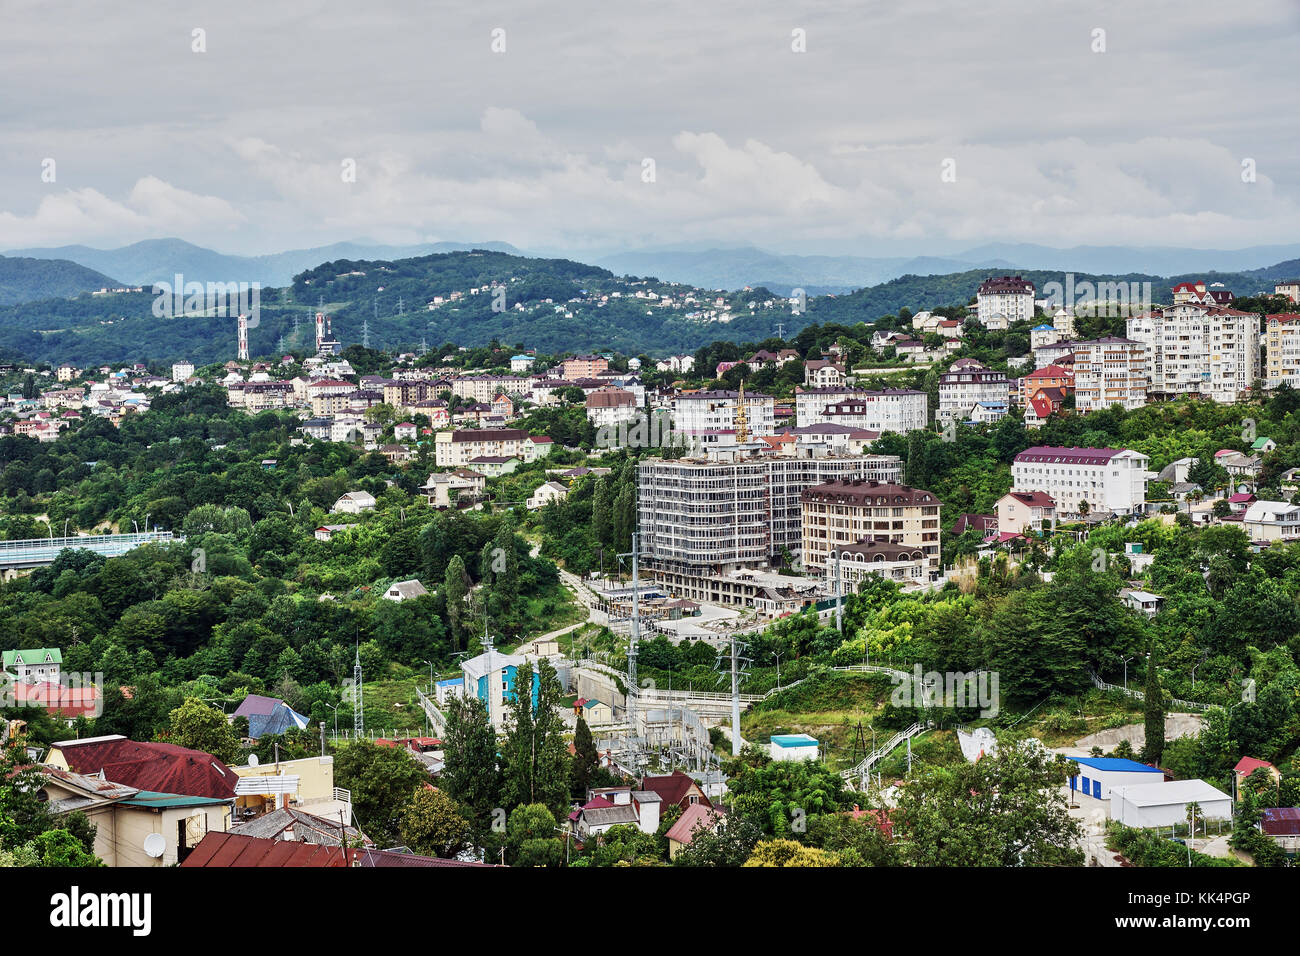 Panorama of Sochi from the air. Houses, streets, trees, the sky are visible. In the distance you can see the sea. Sochi, Russia, cityscape Stock Photo